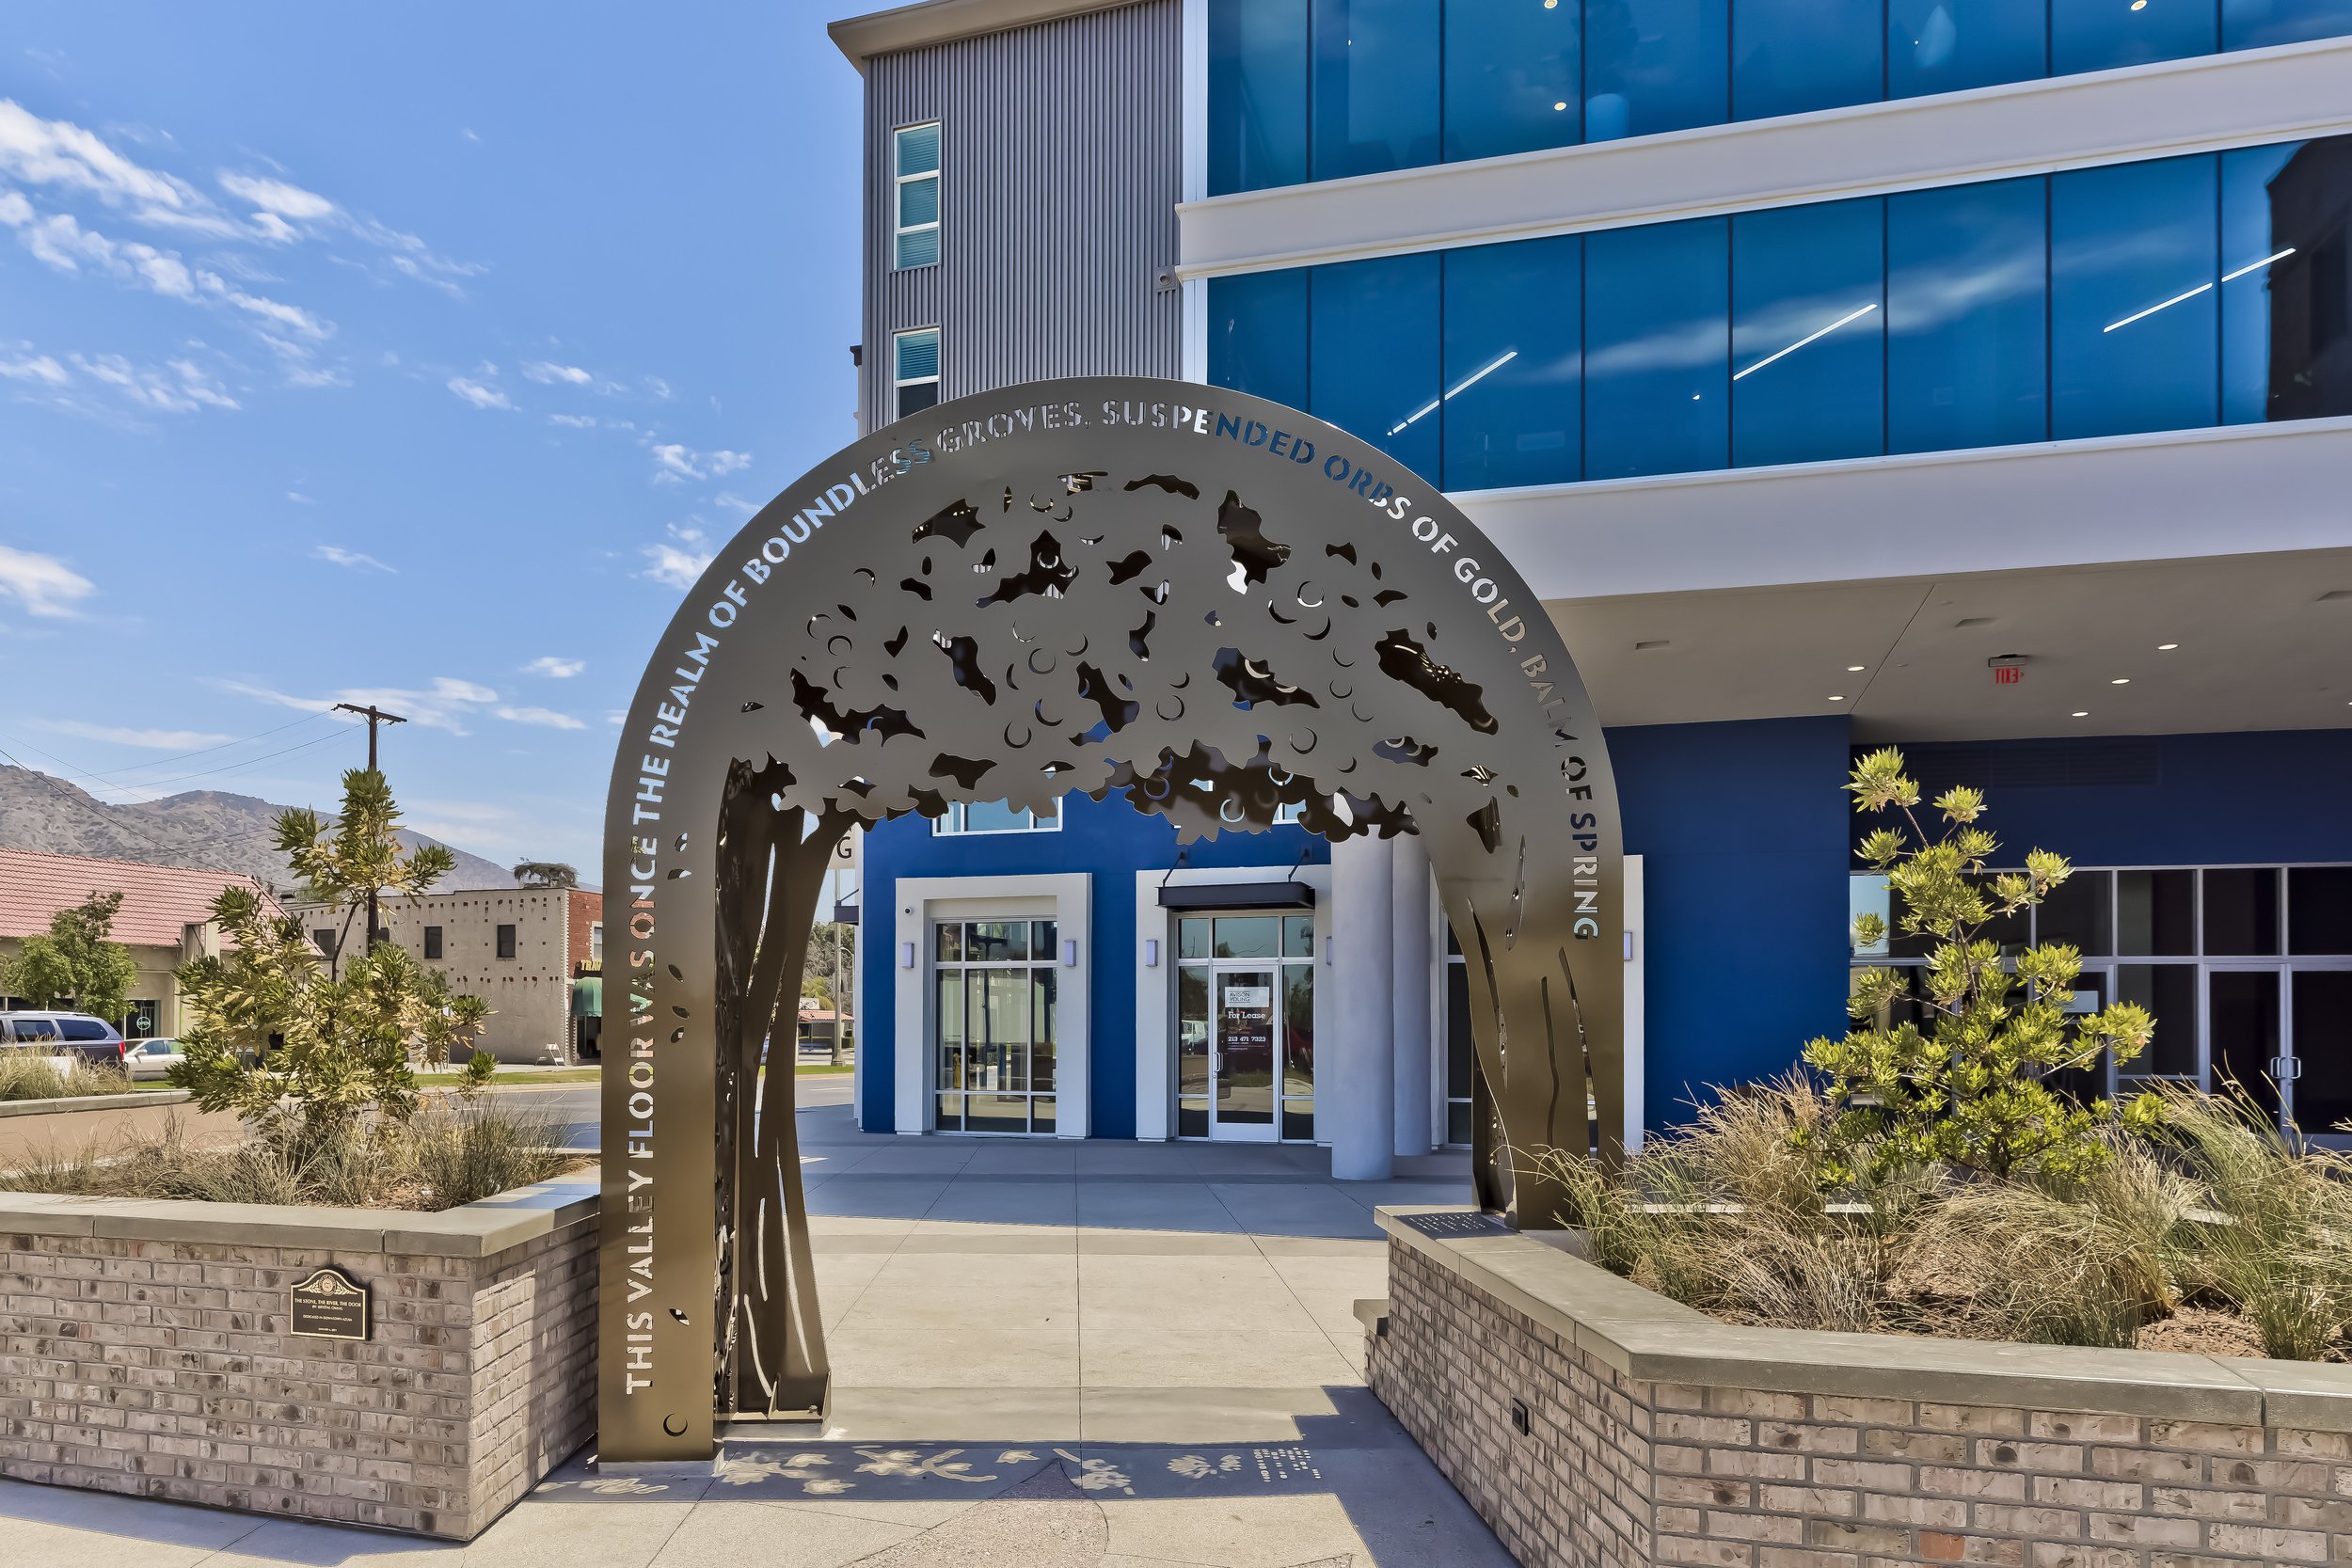  The Stone, the River, the Door  Public art commission for mixed-use development in downtown Azusa  An arched doorway acting as a passage through time, a portal. Drawing inspiration from the history of the area and the name of the development “The Or